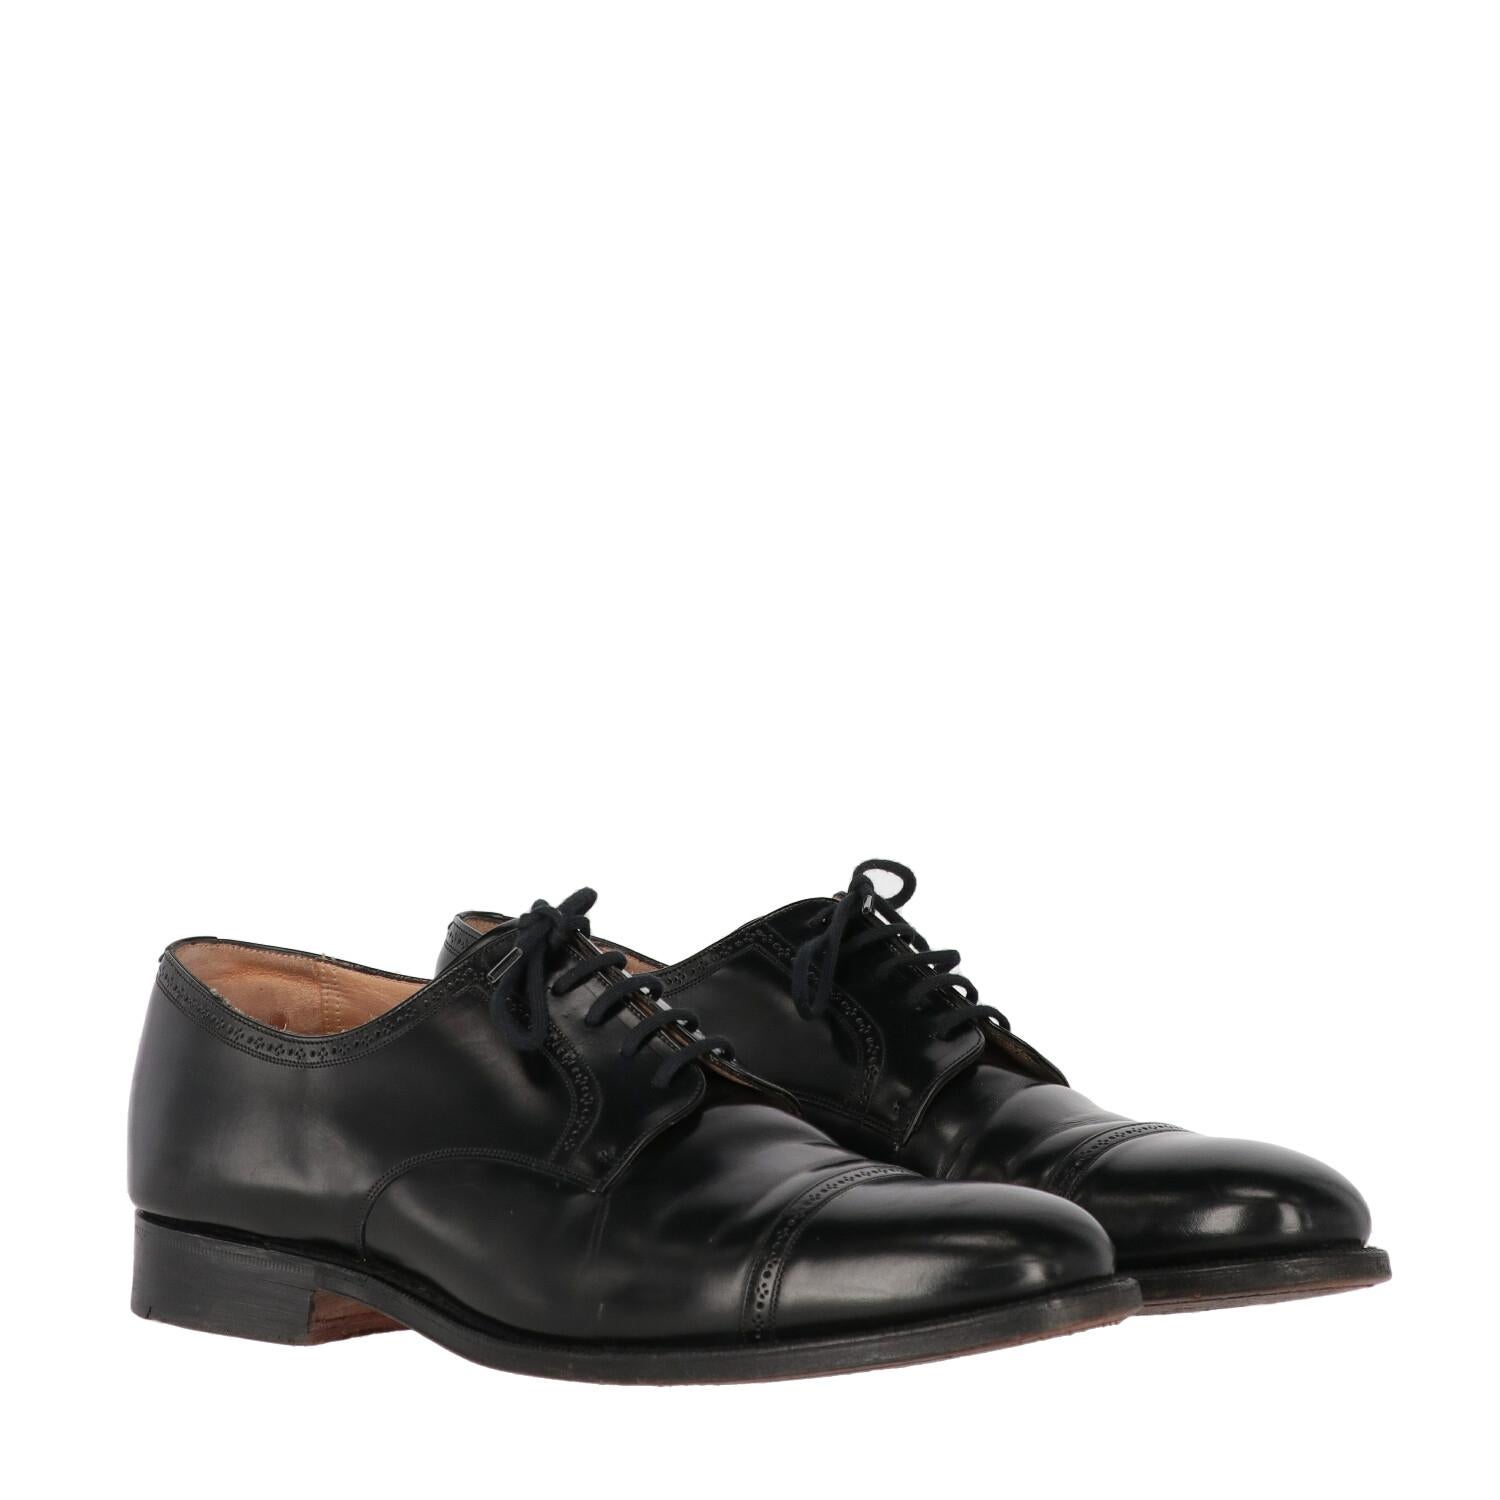 Black 1990s Church's genuine black leather classic lace-up shoes